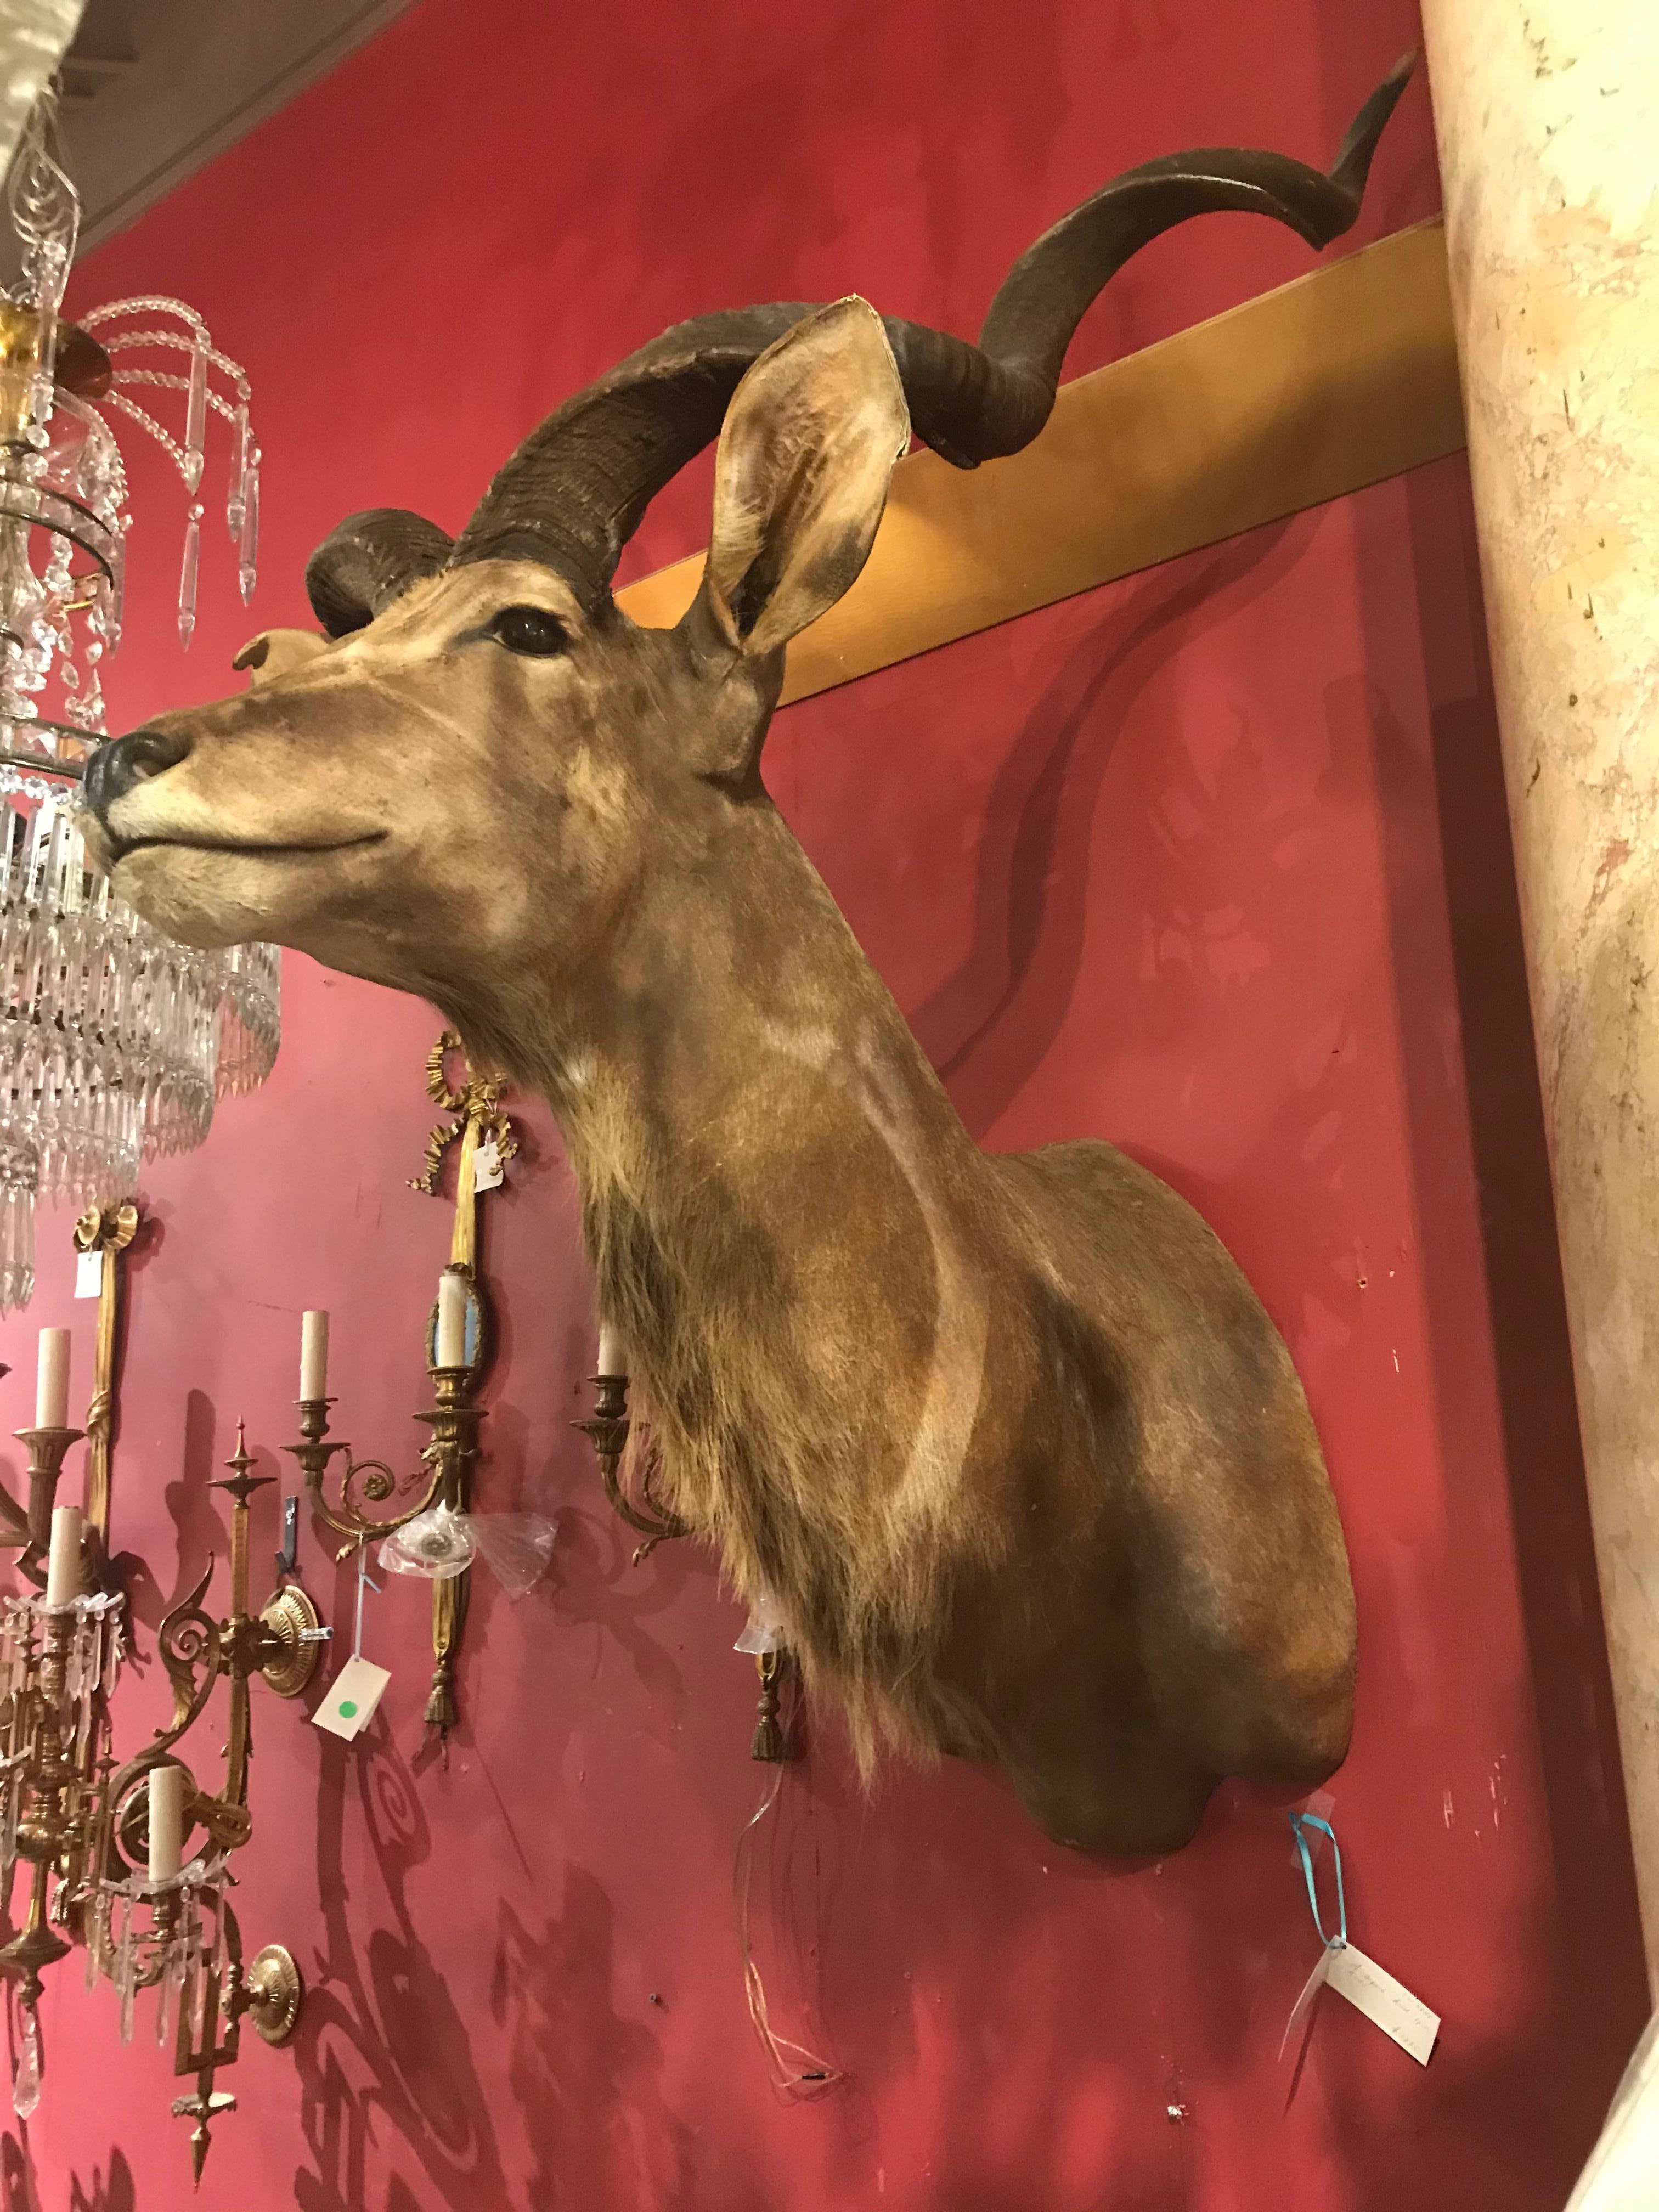 A superb taxidermy head and chest of a greater kudu
Dimensions: Height 58